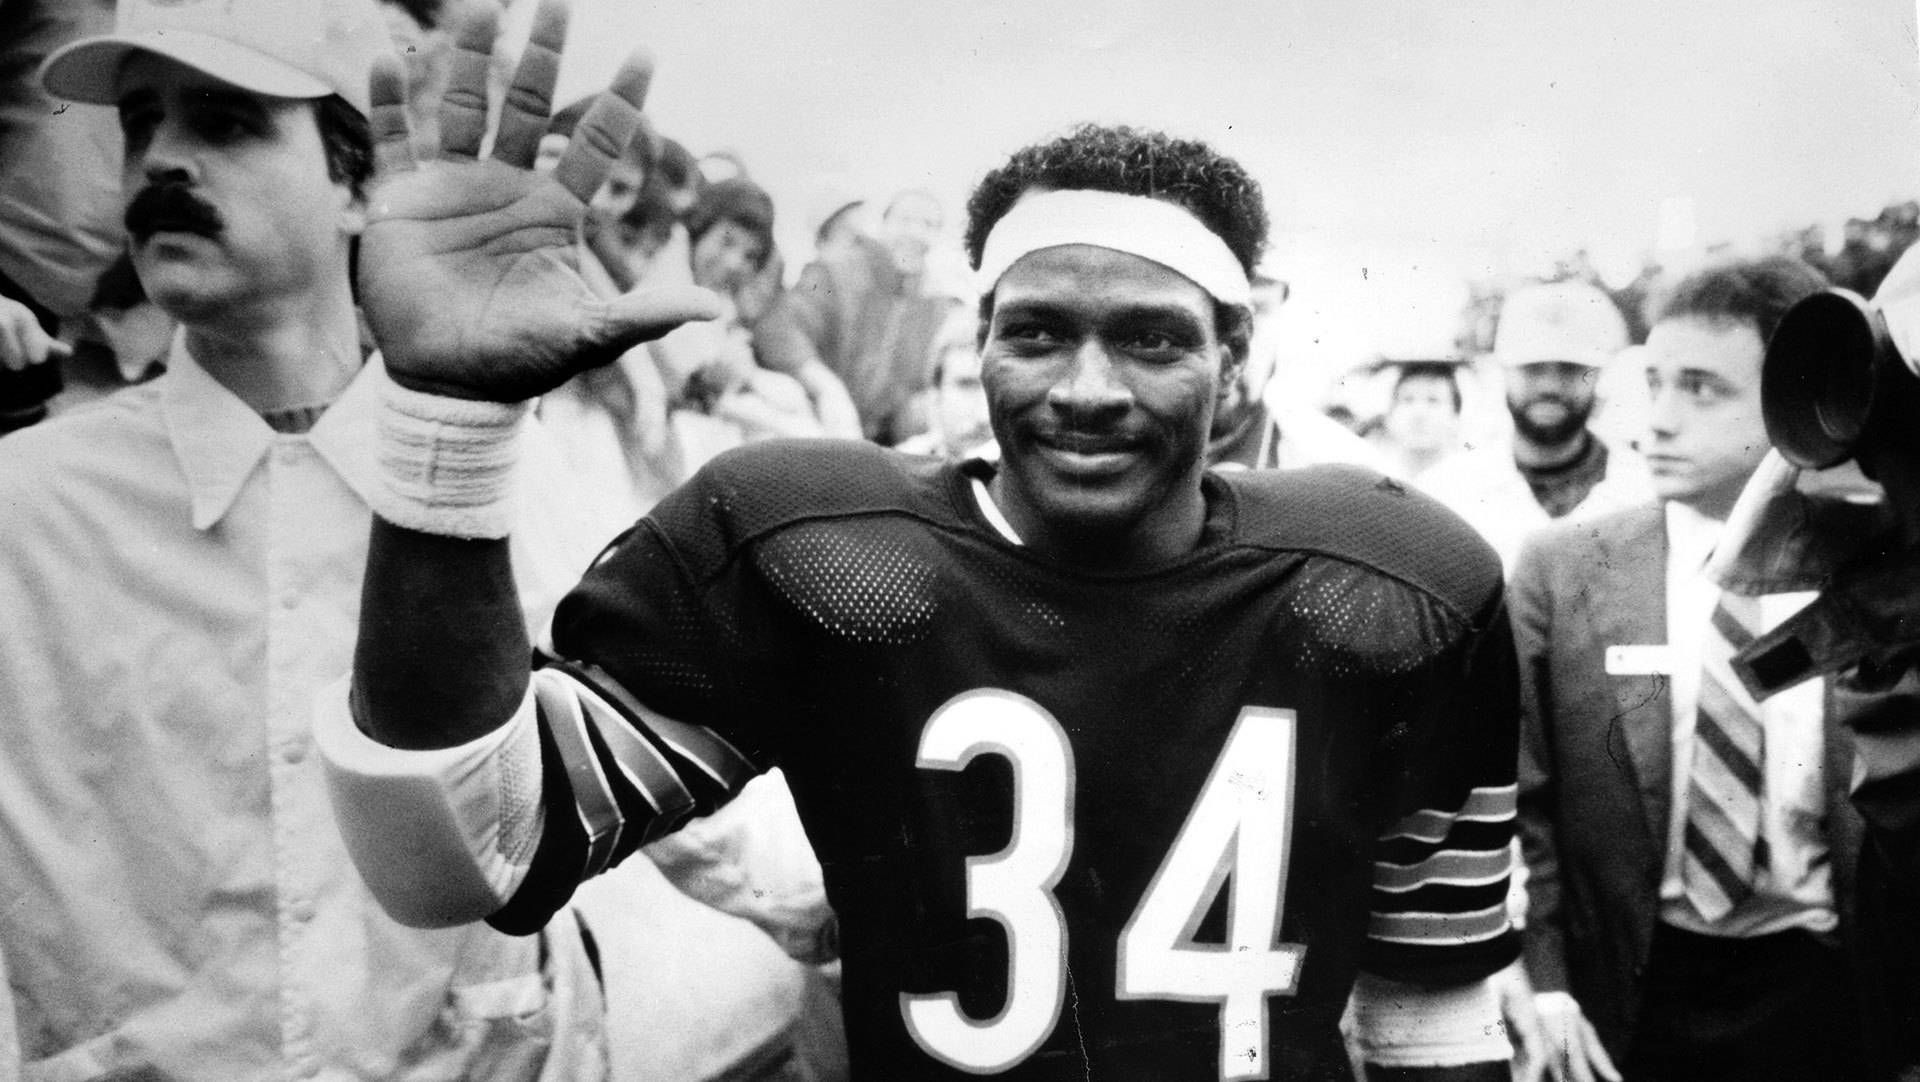 ct-sports-walter-payton-chicago-bears-timeline